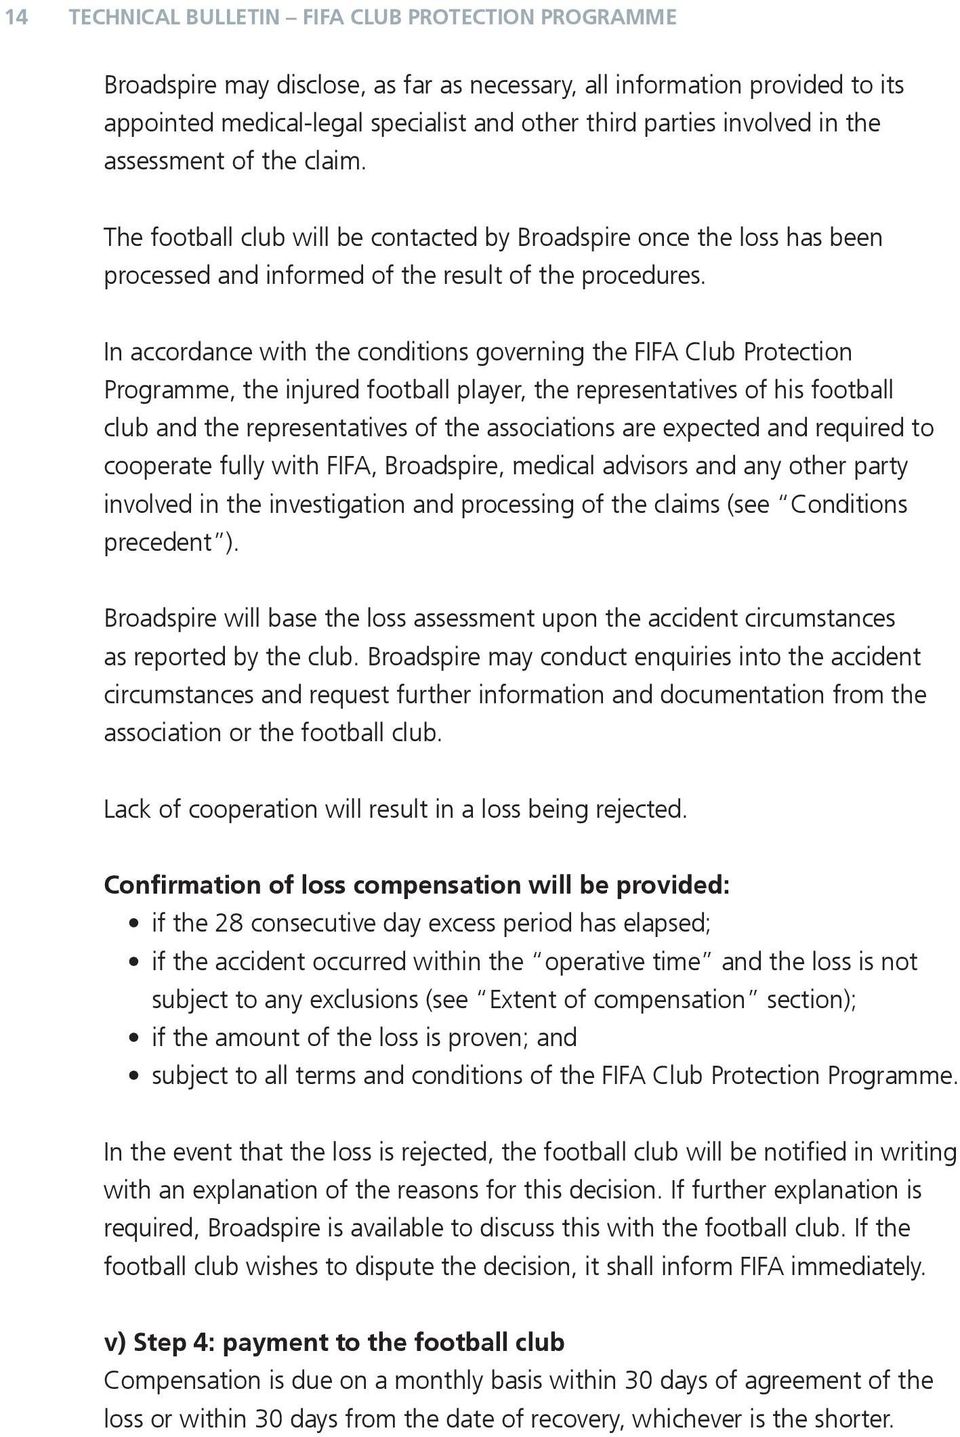 In accordance with conditions governing FIFA Club Protection Programme, injured football player, representatives his football club representatives associations are expected required to cooperate